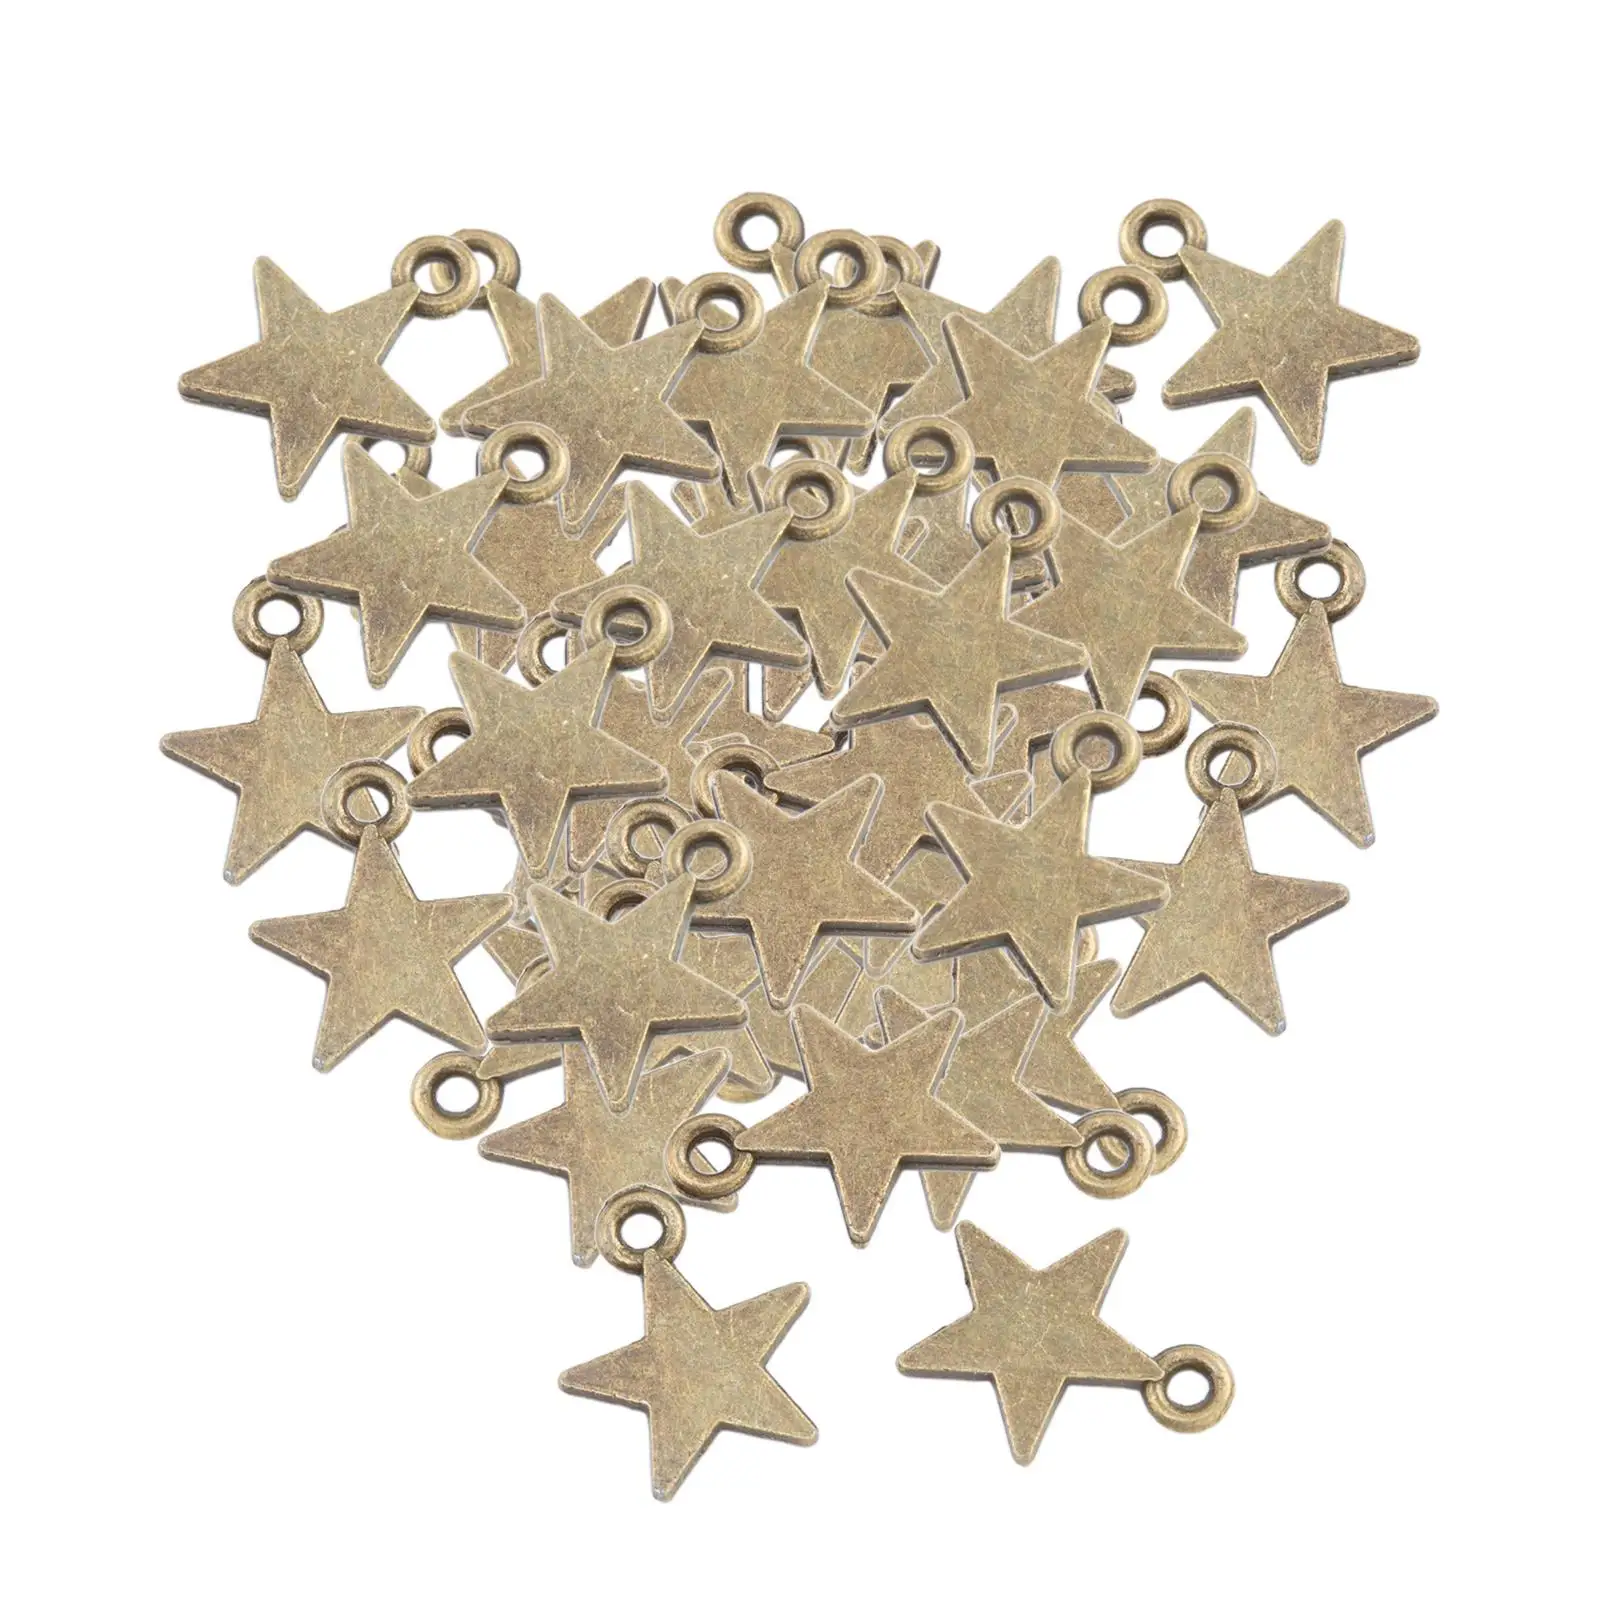 50 Pieces Star Charms Exquisite Creative Jewelry Making for DIY Bag Crafting